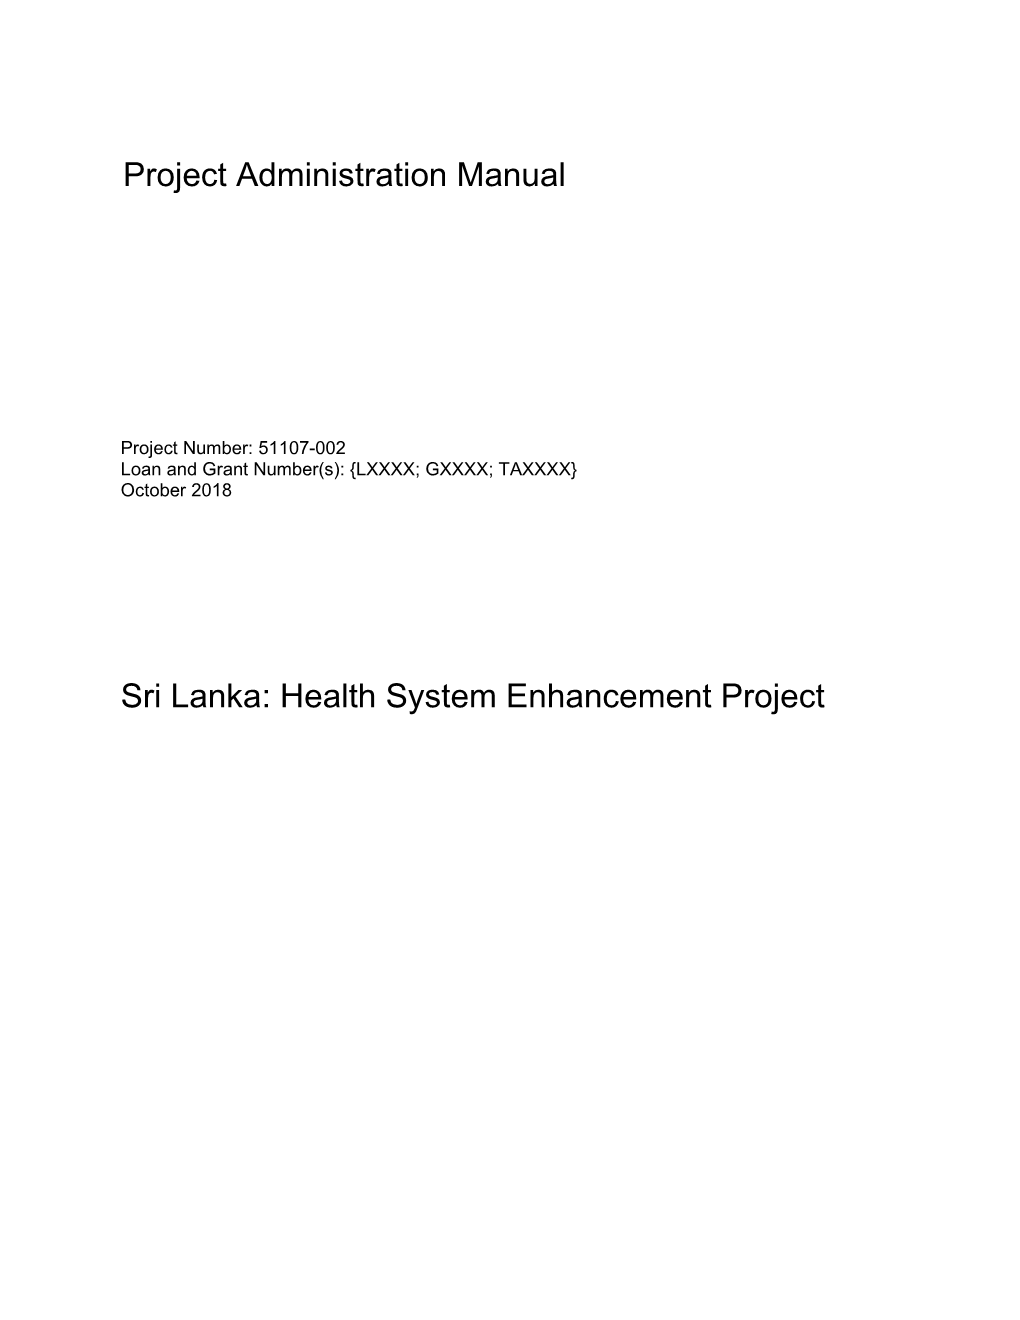 Health System Enhancement Project: Project Administration Manual